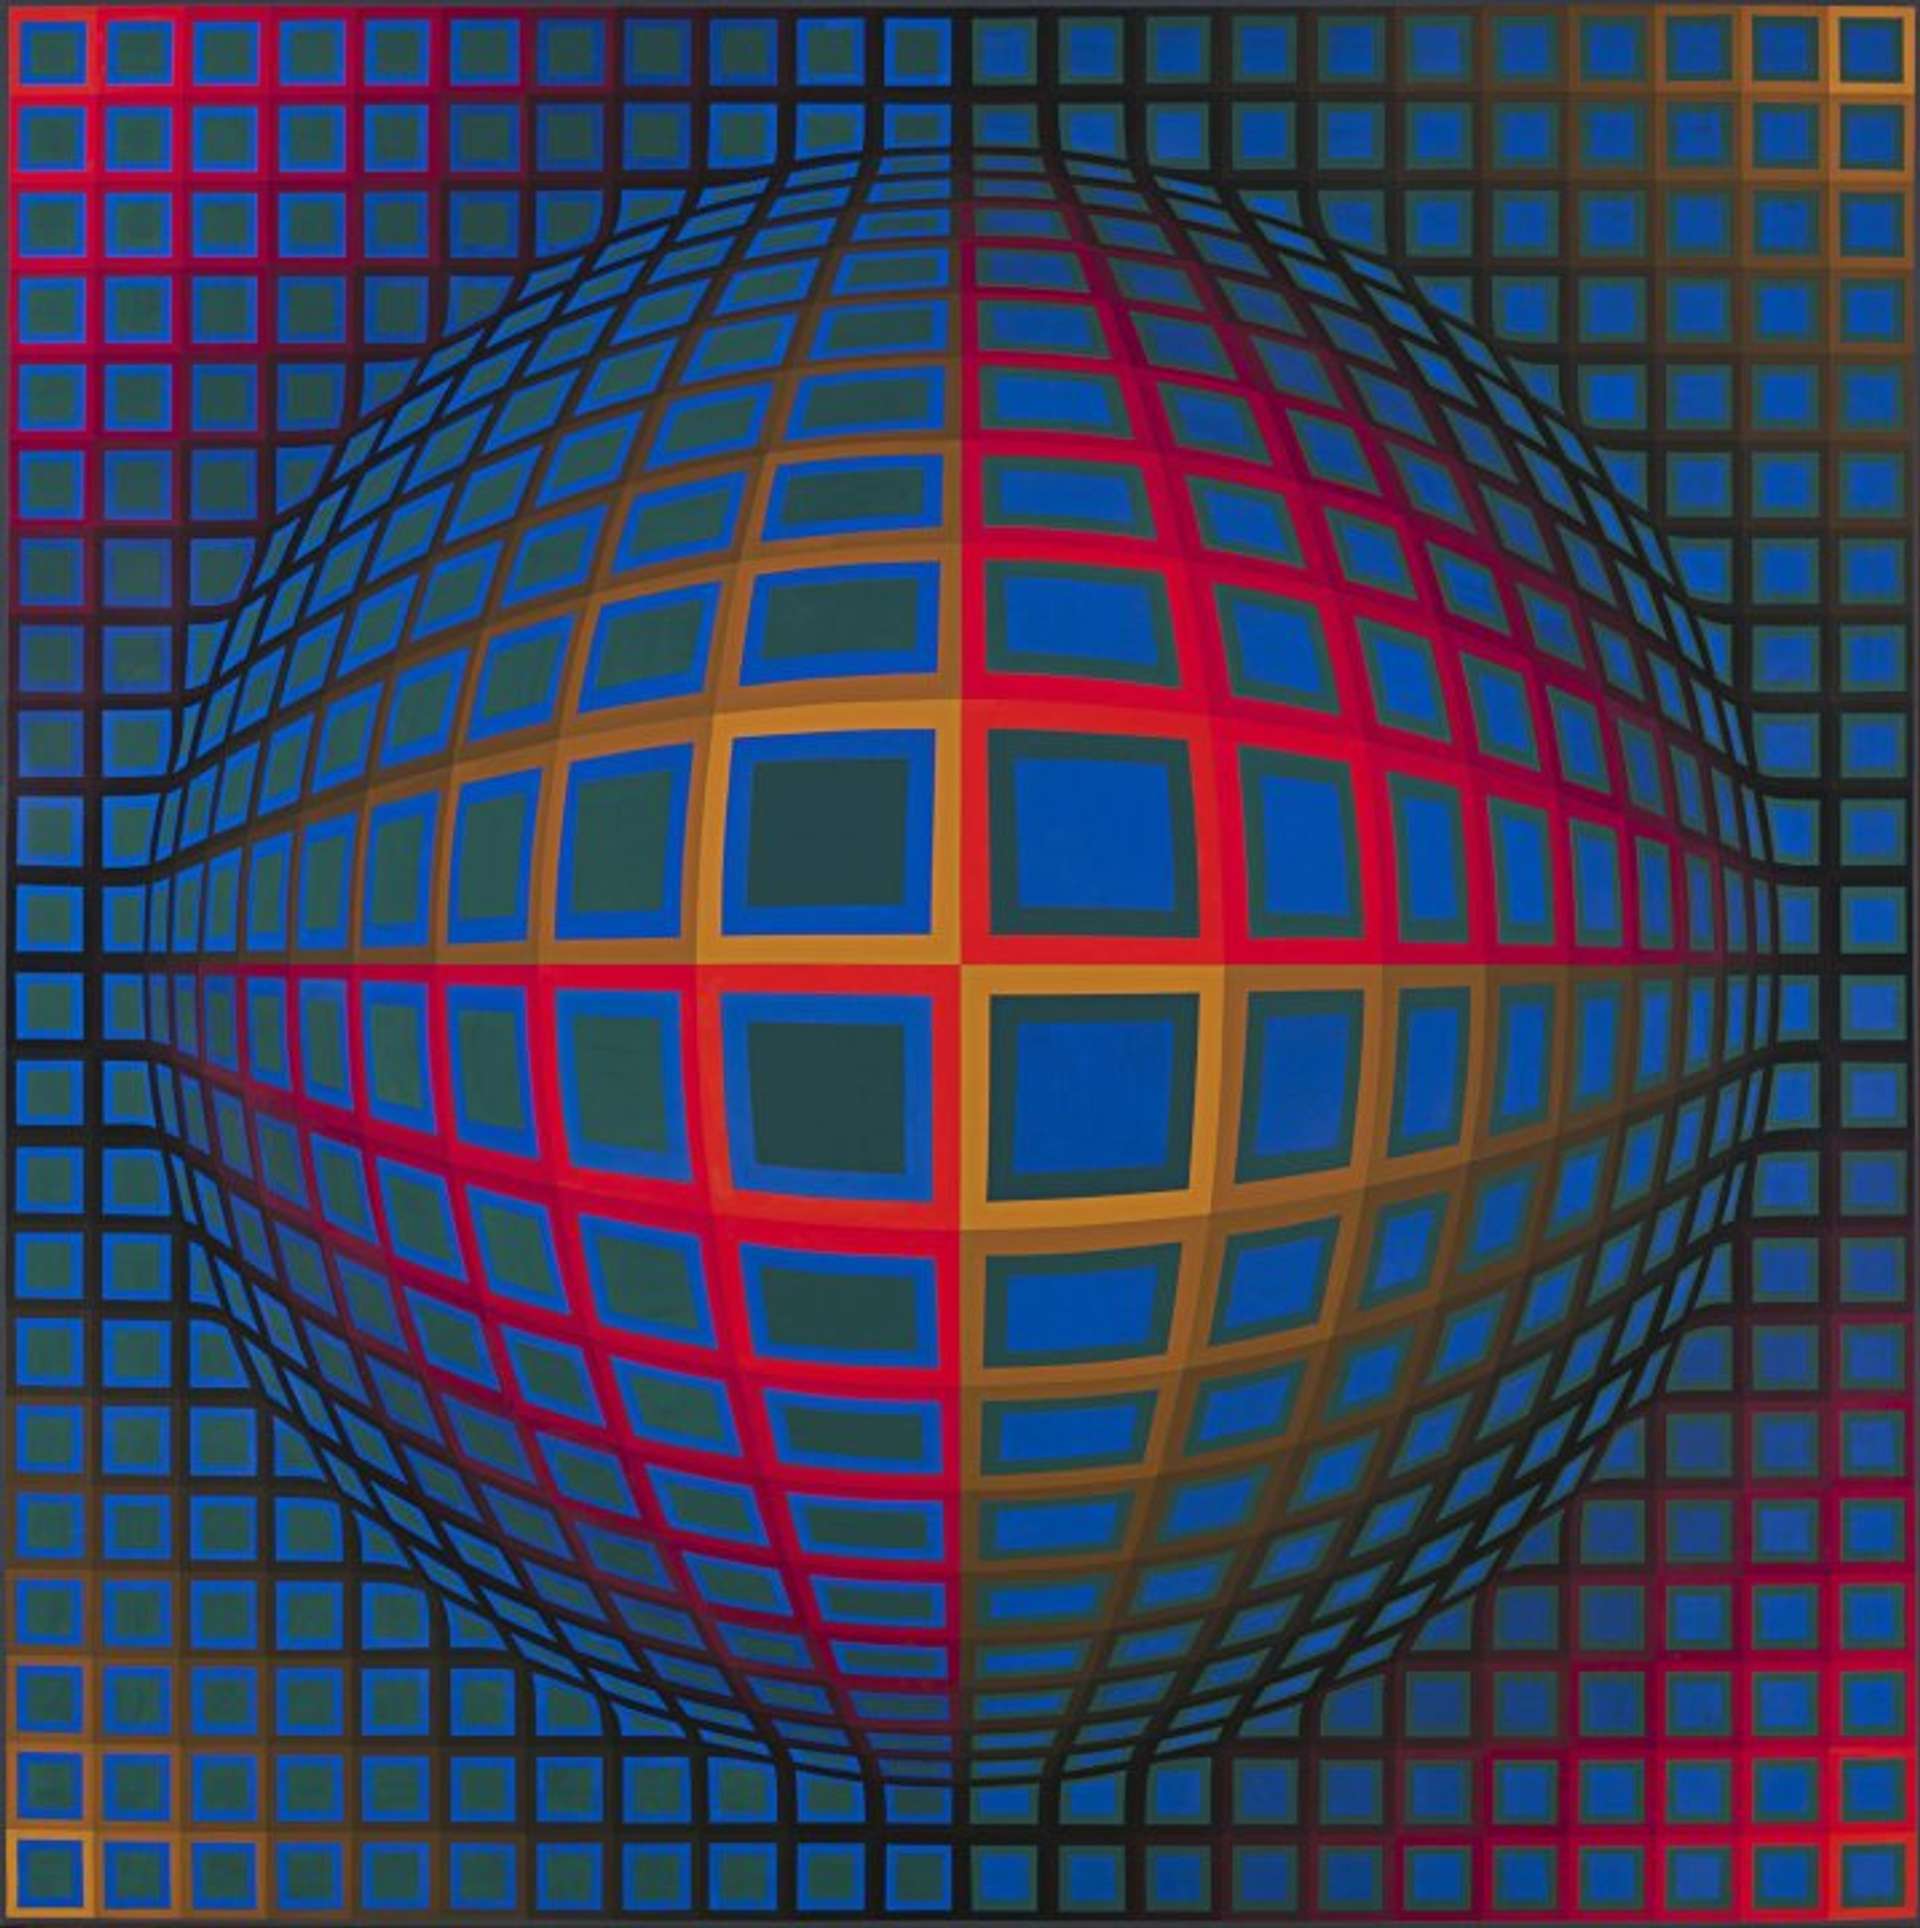 An abstracted grid-like composition featuring repeating squares outlined in bright pink, gold, and cobalt on a blue background which become larger in size and more disrupted in the centre of the work to create an optical effect.